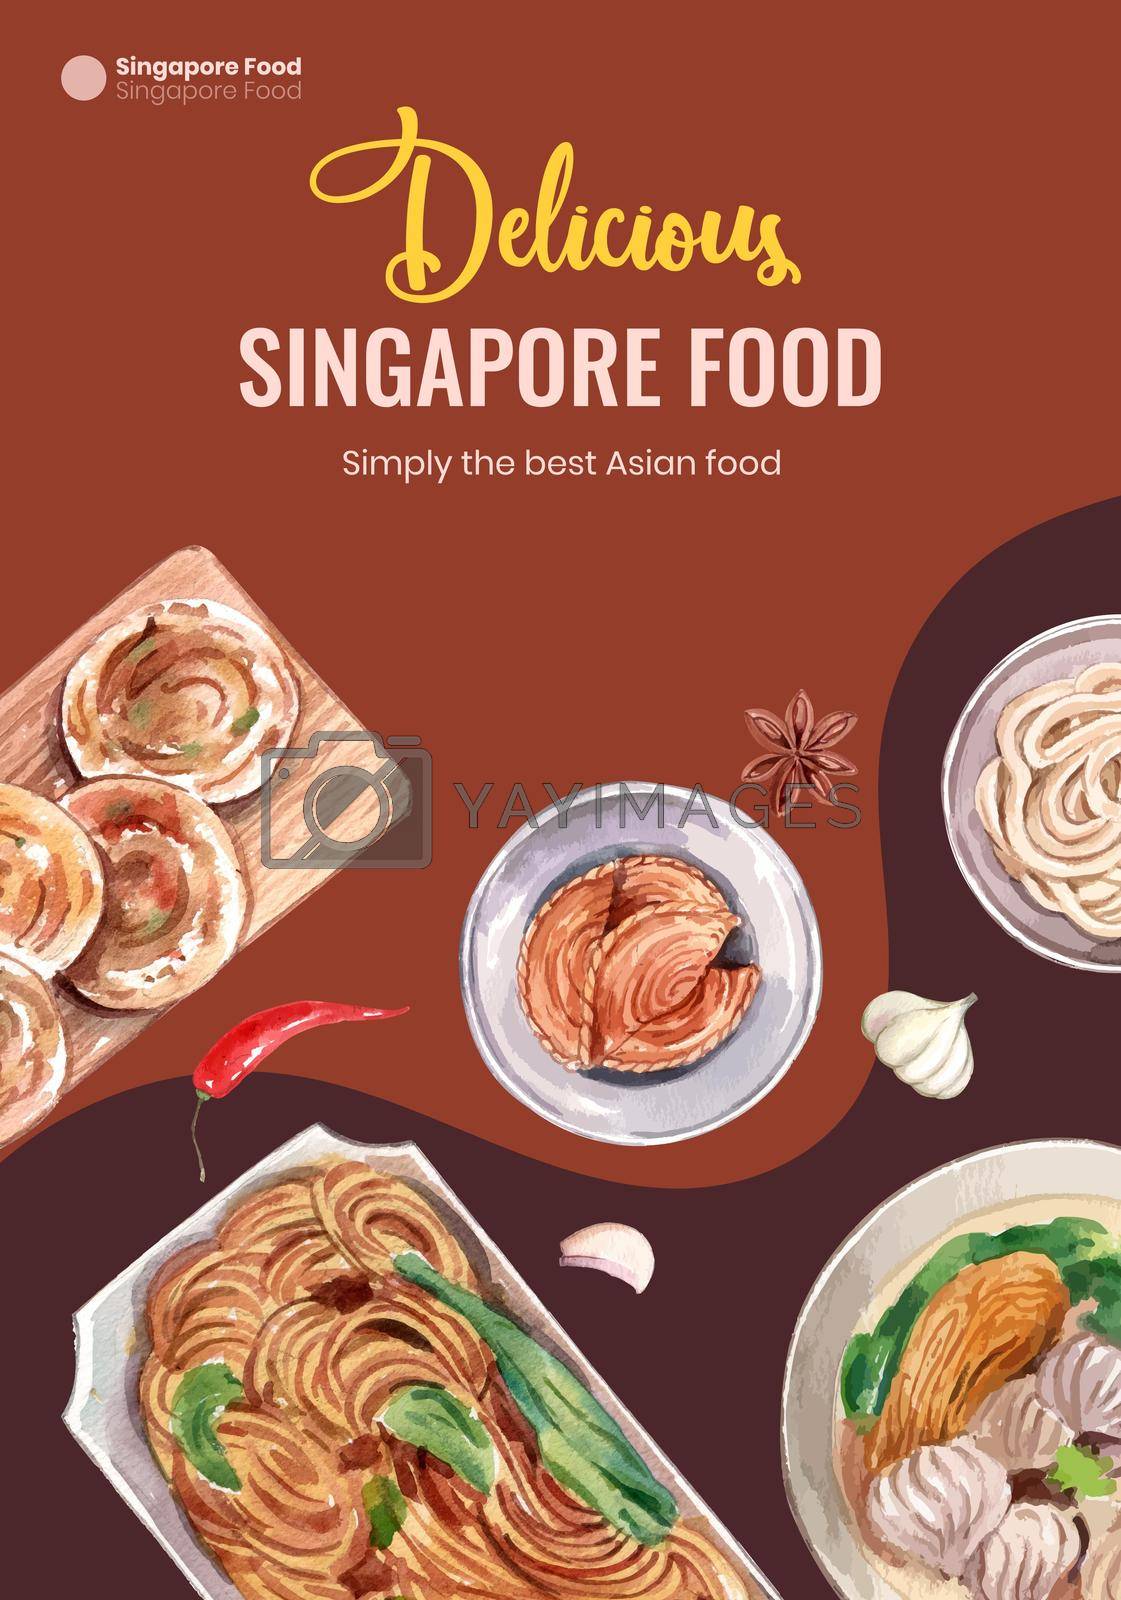 Poster template with Singapore cuisine concept,watercolor style
